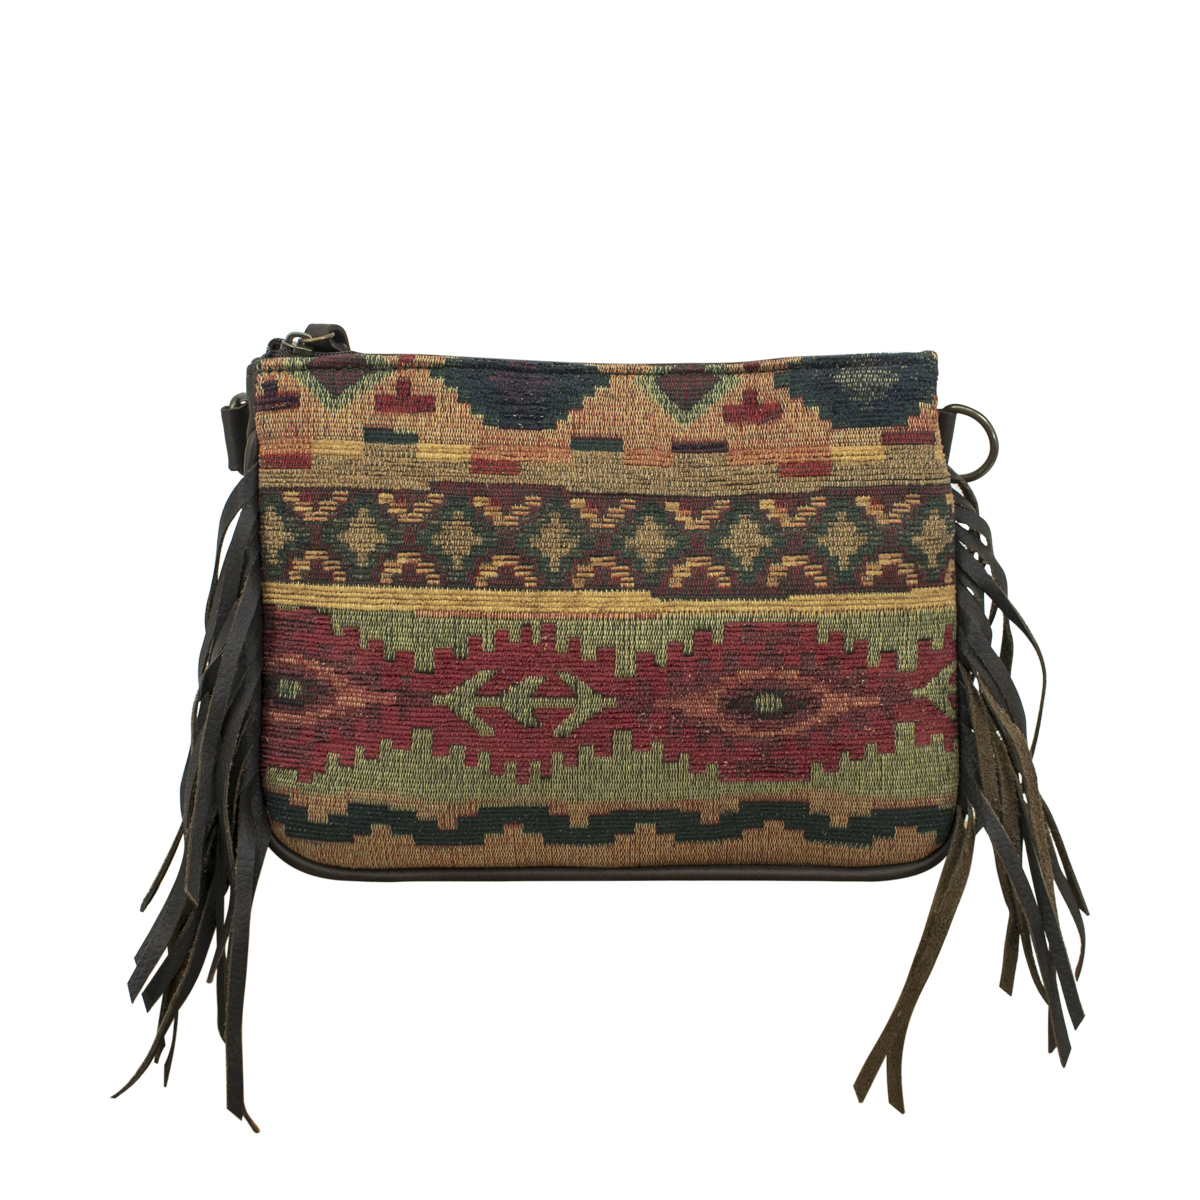 Picture of American West 6140788 28 in. Hand Woven Santa Fe Tapestry Multi-Compartment Crossbody Leather Handbag, Multi Color